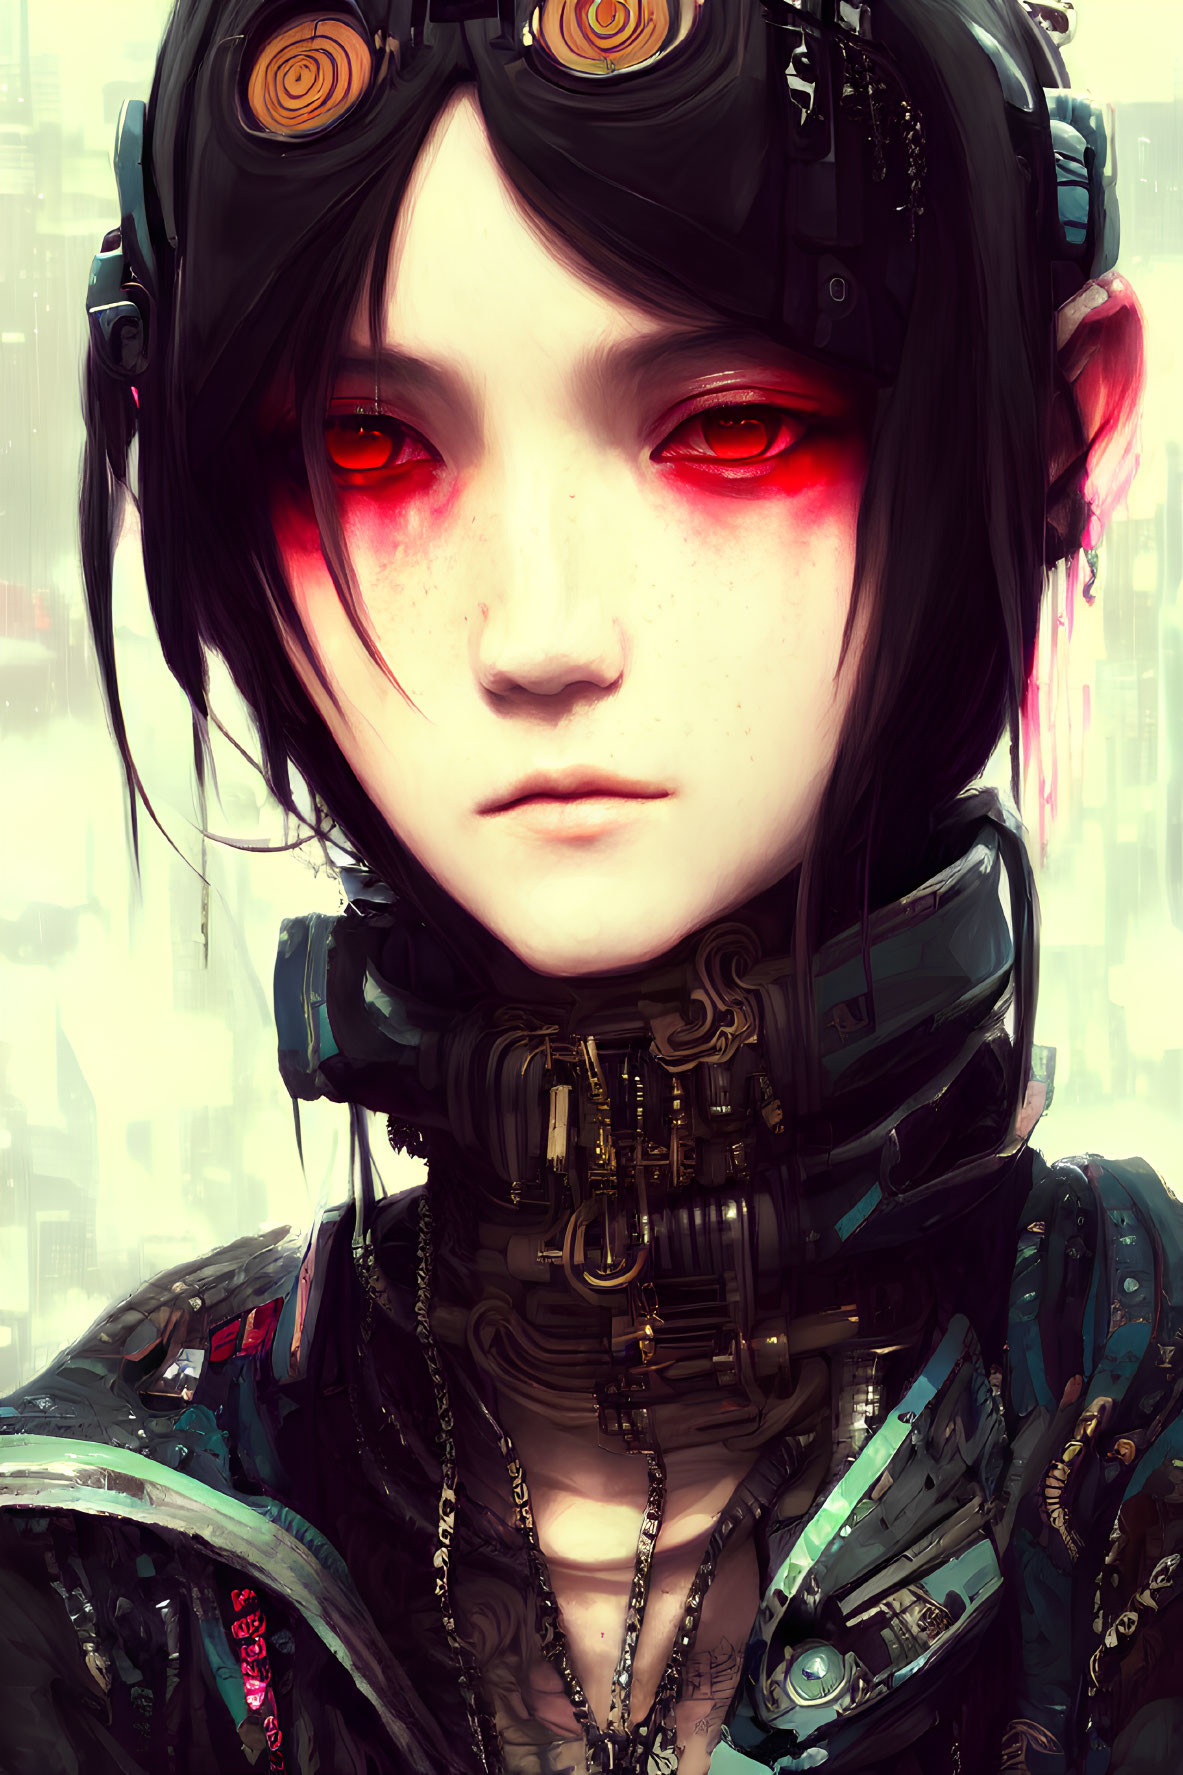 Illustration of person with red eyes, dark hair, cybernetic enhancements, and headphones on light